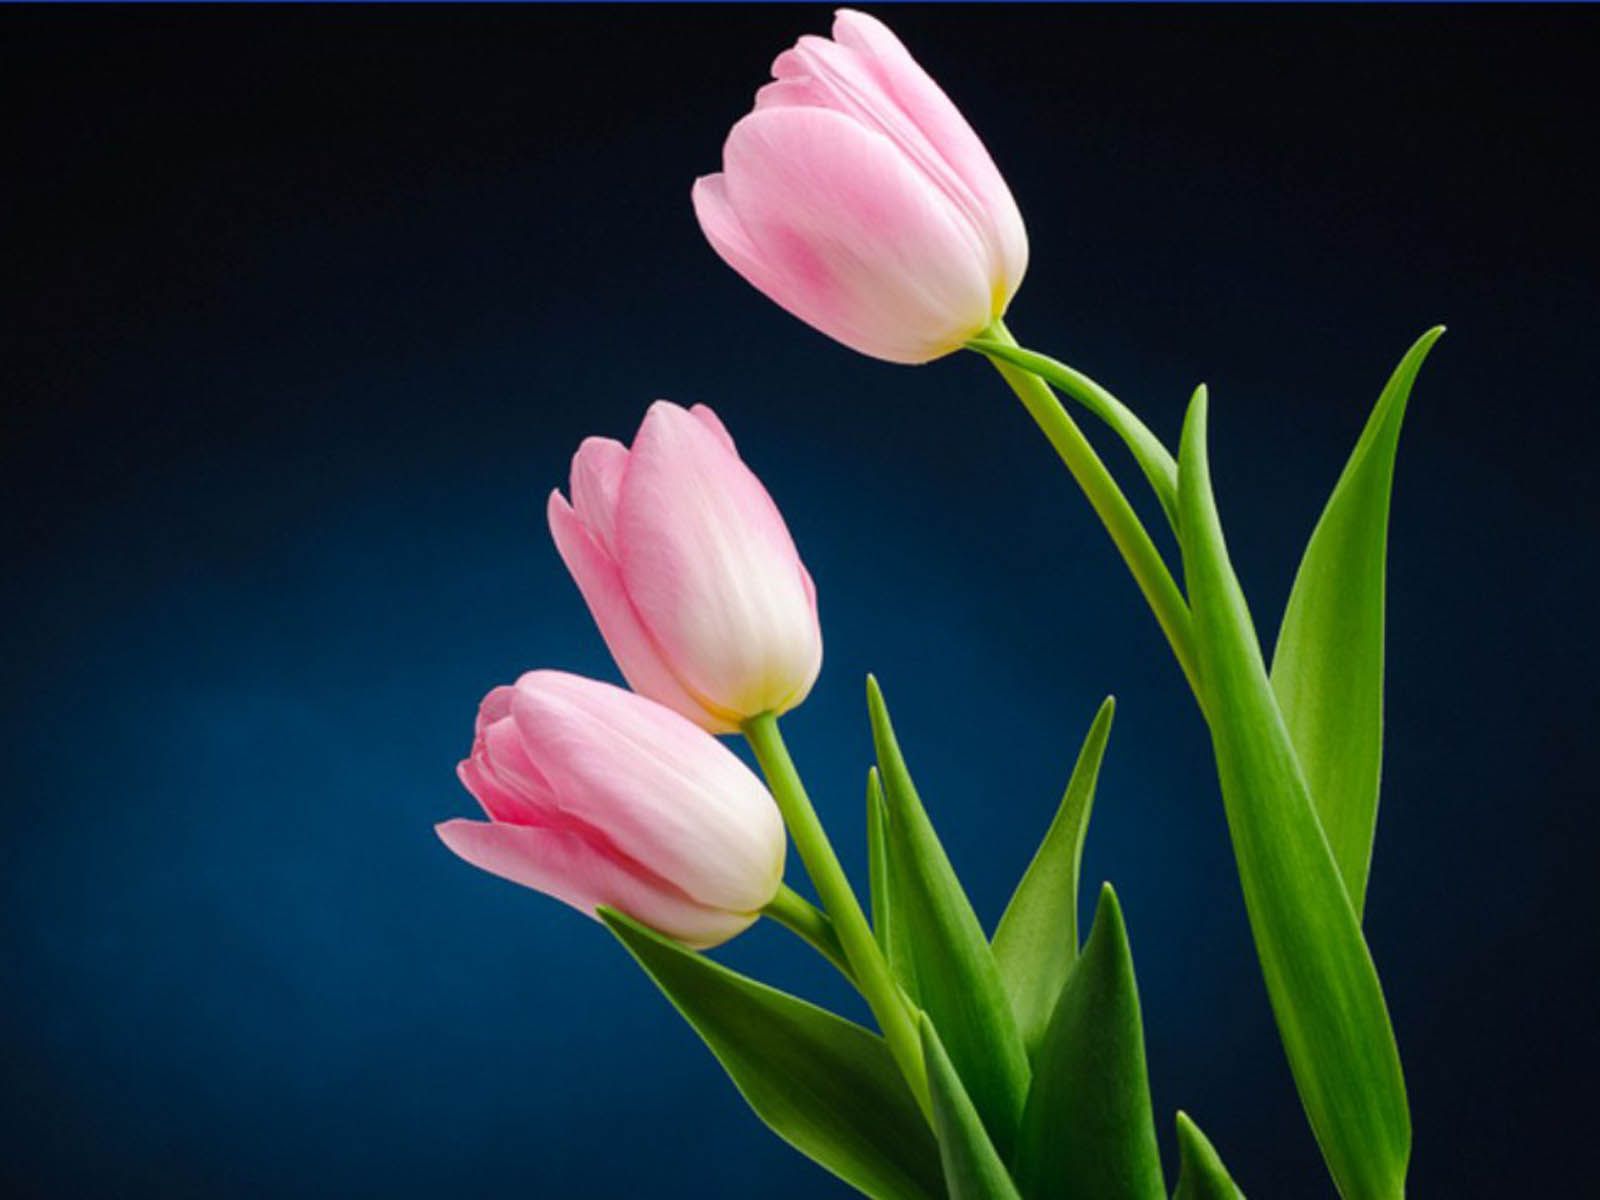 pink tulips | Pink Tulip Flower Pictures - 2013 Wallpapers | flower ...